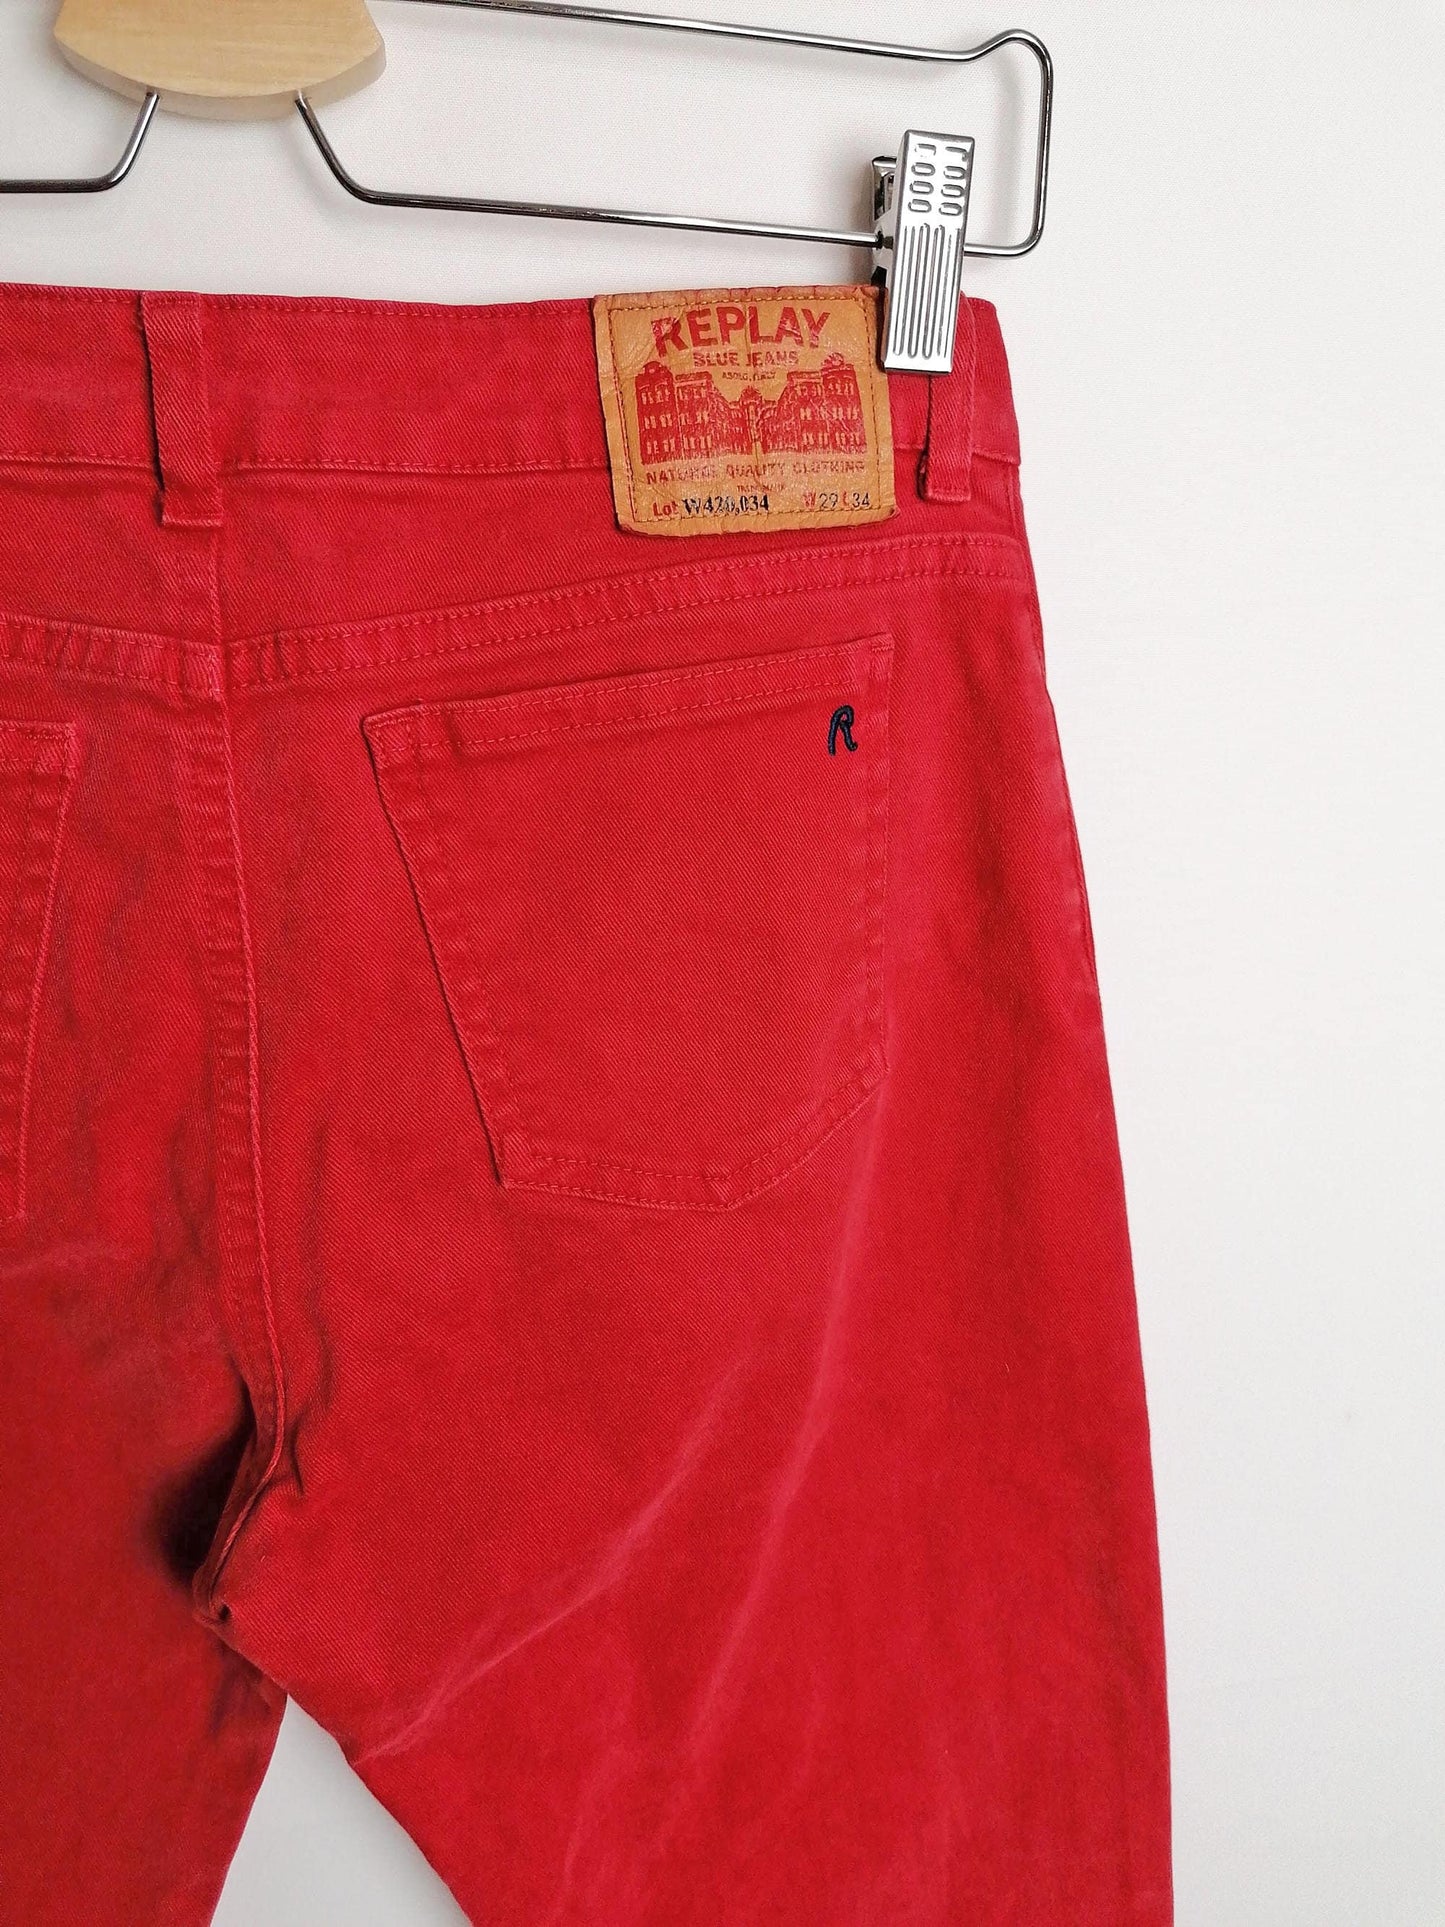 REPLAY Red Jeans Low Rise Flared Leg - size XS-S